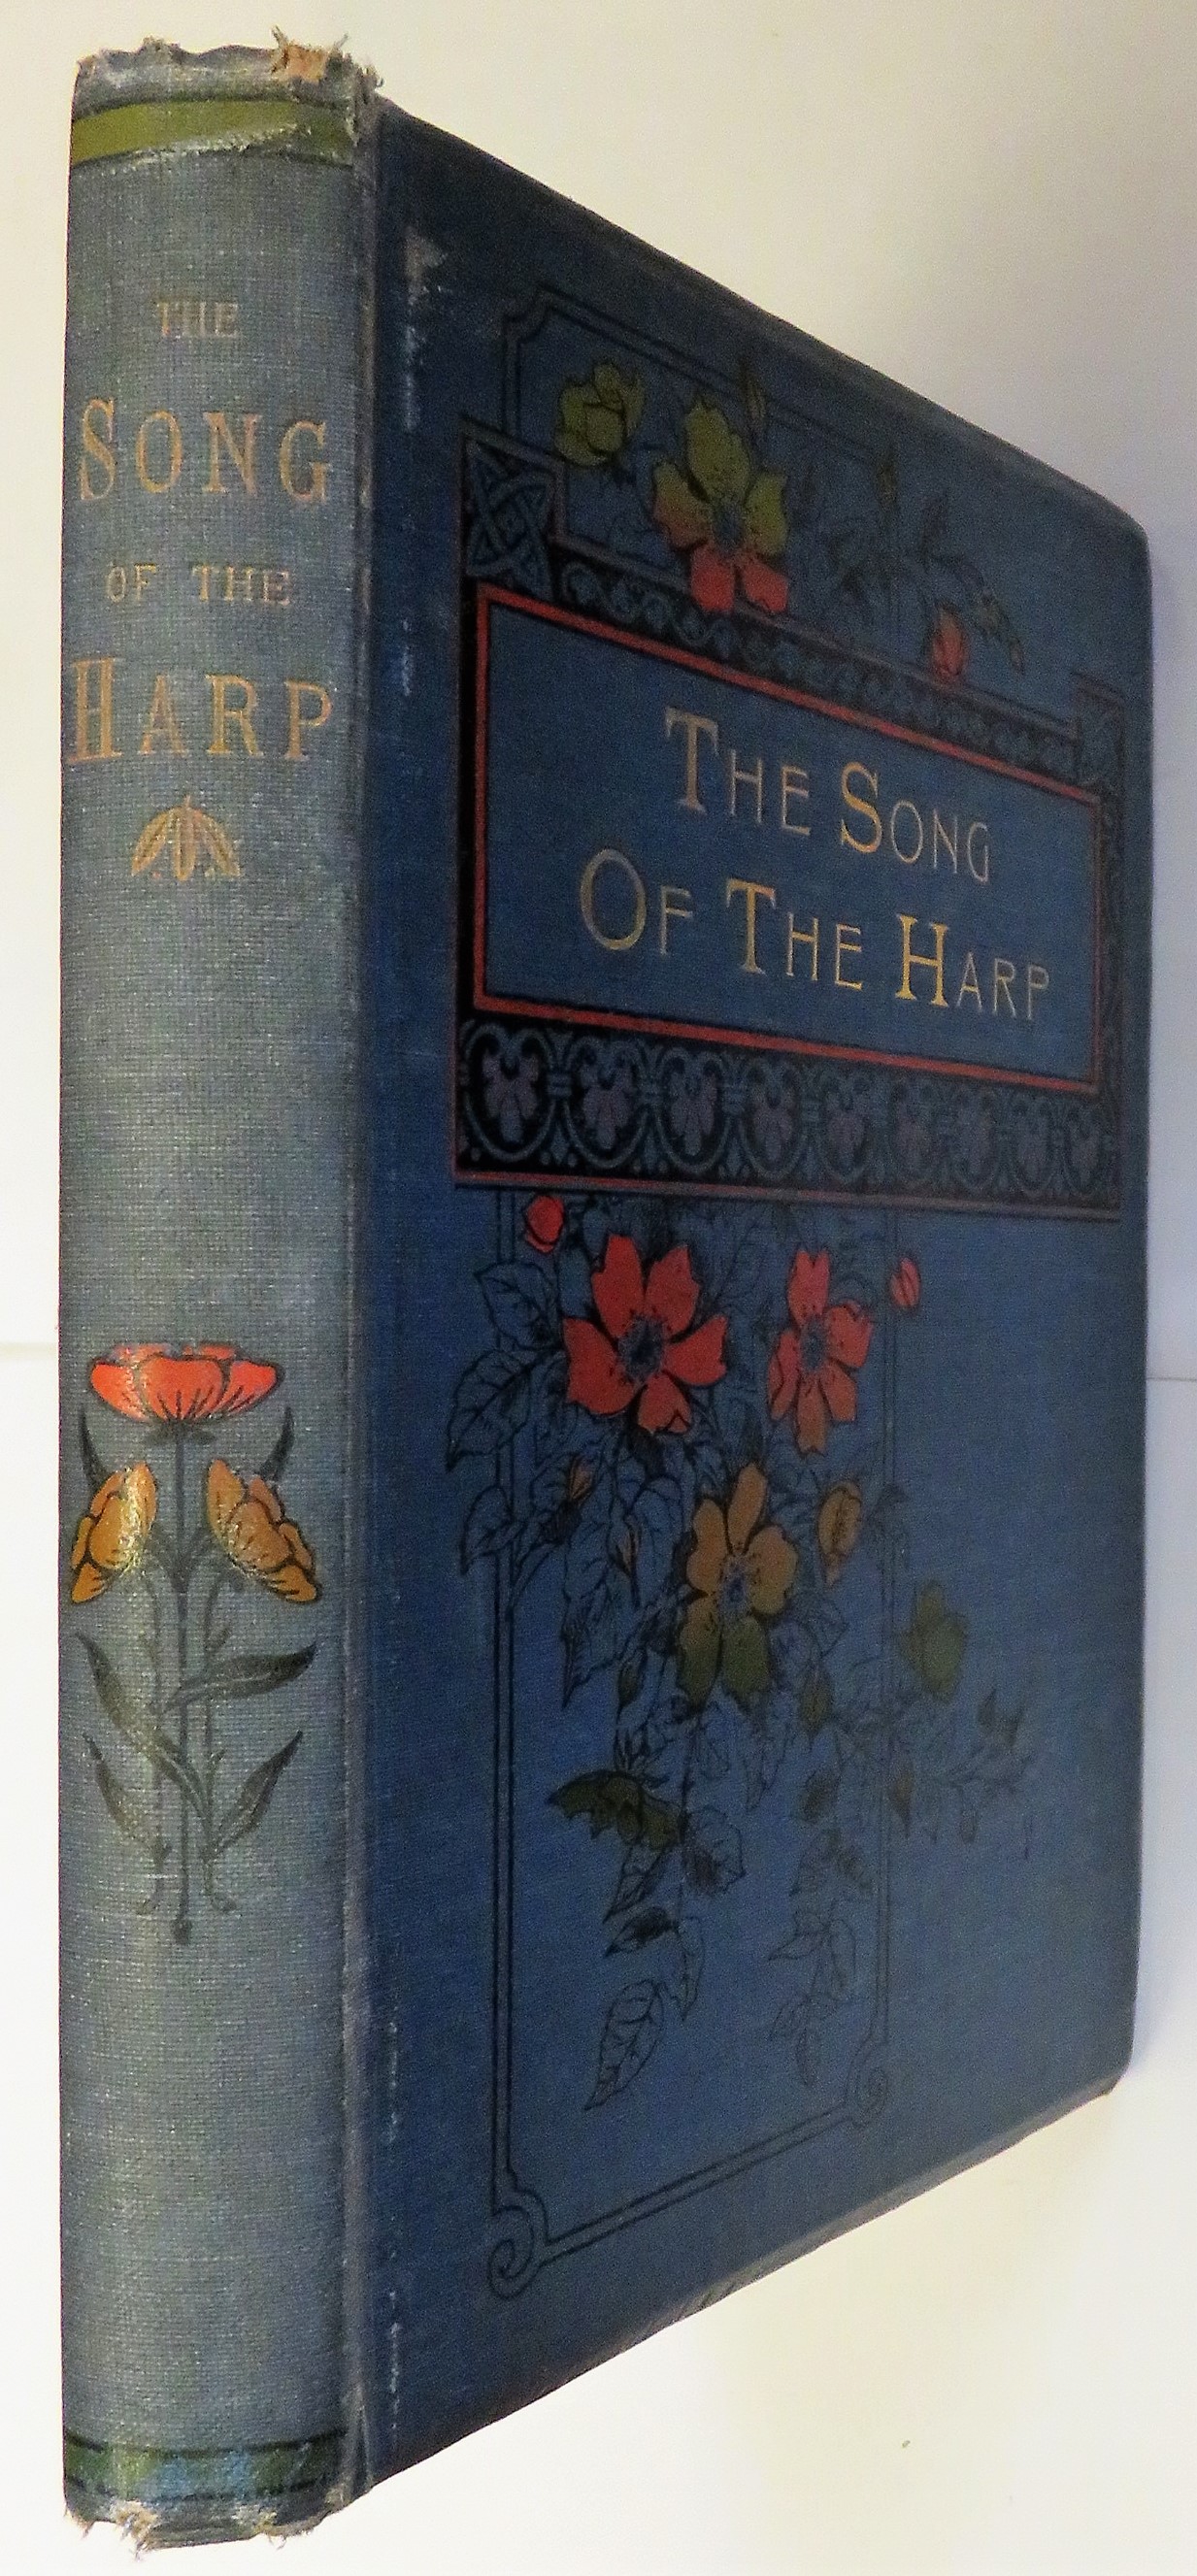 The Song of the Harp An Original Fairy Tale